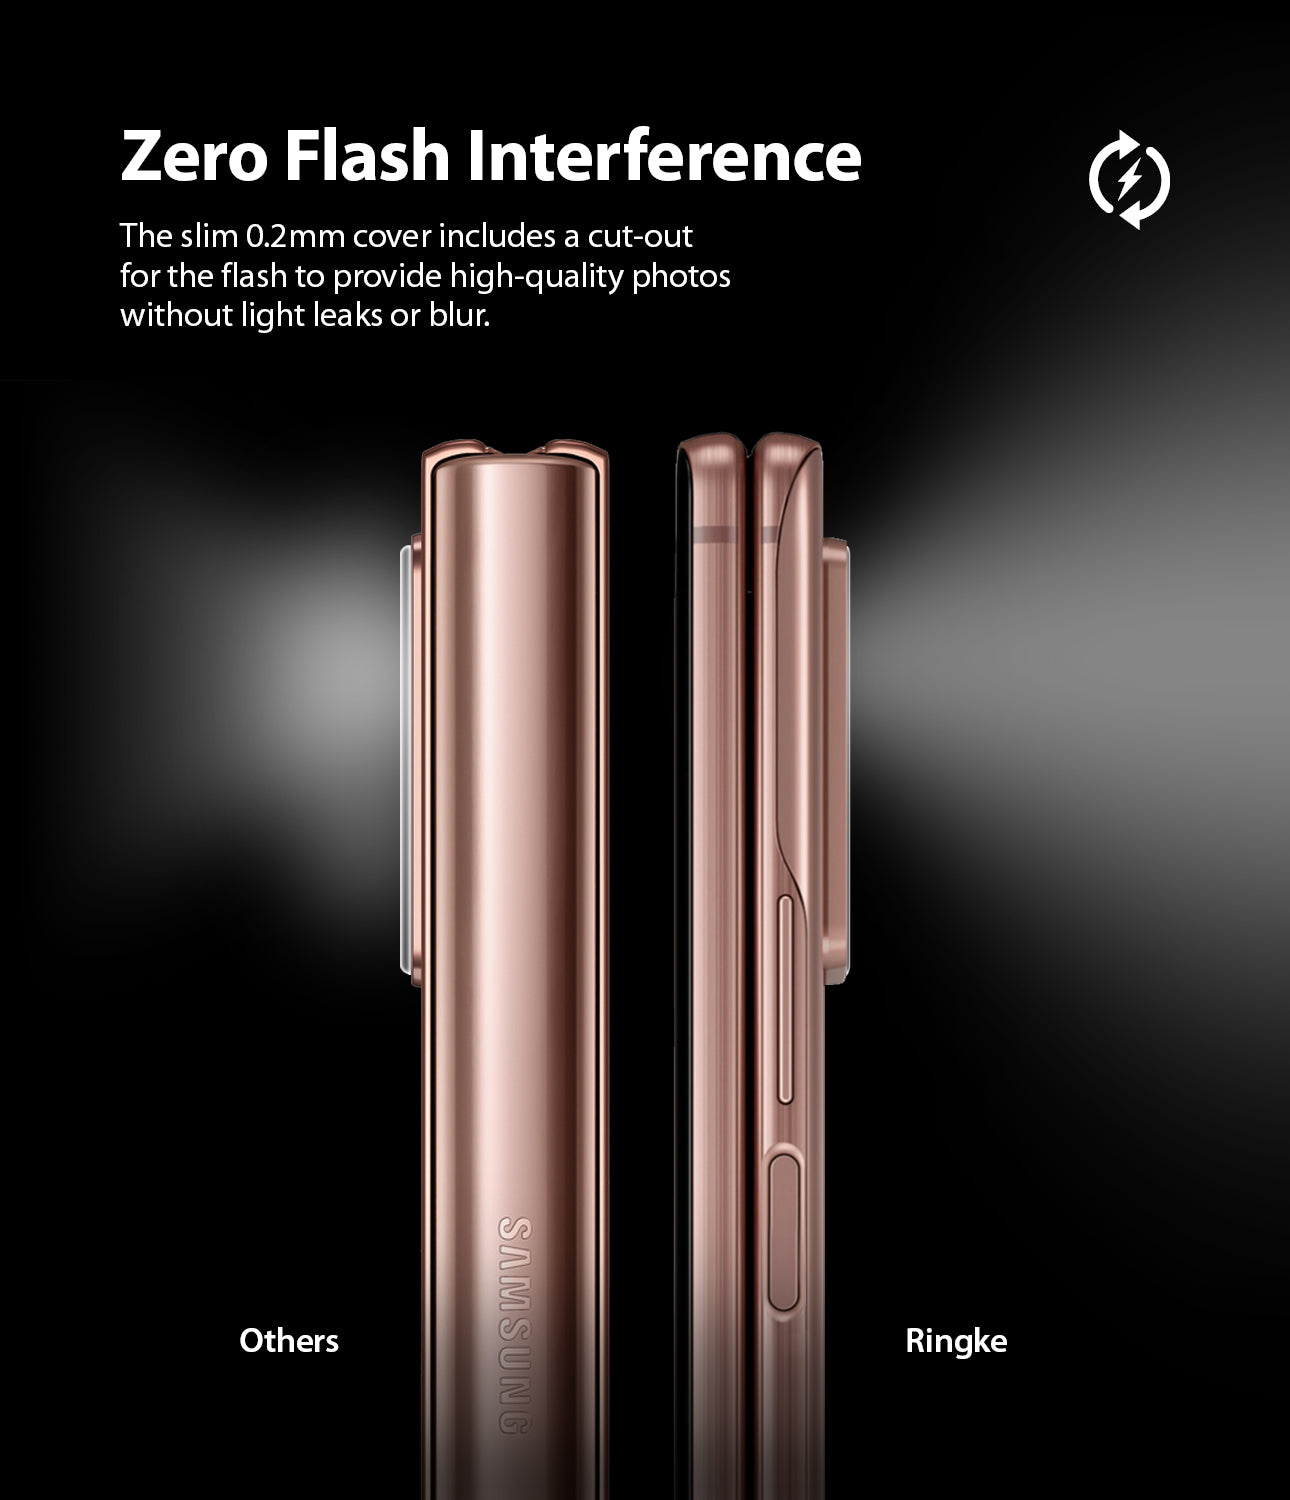 the slim 0.2mm cover includes a cut-out for the flash to provide high-quality pictures without light leaks or blur